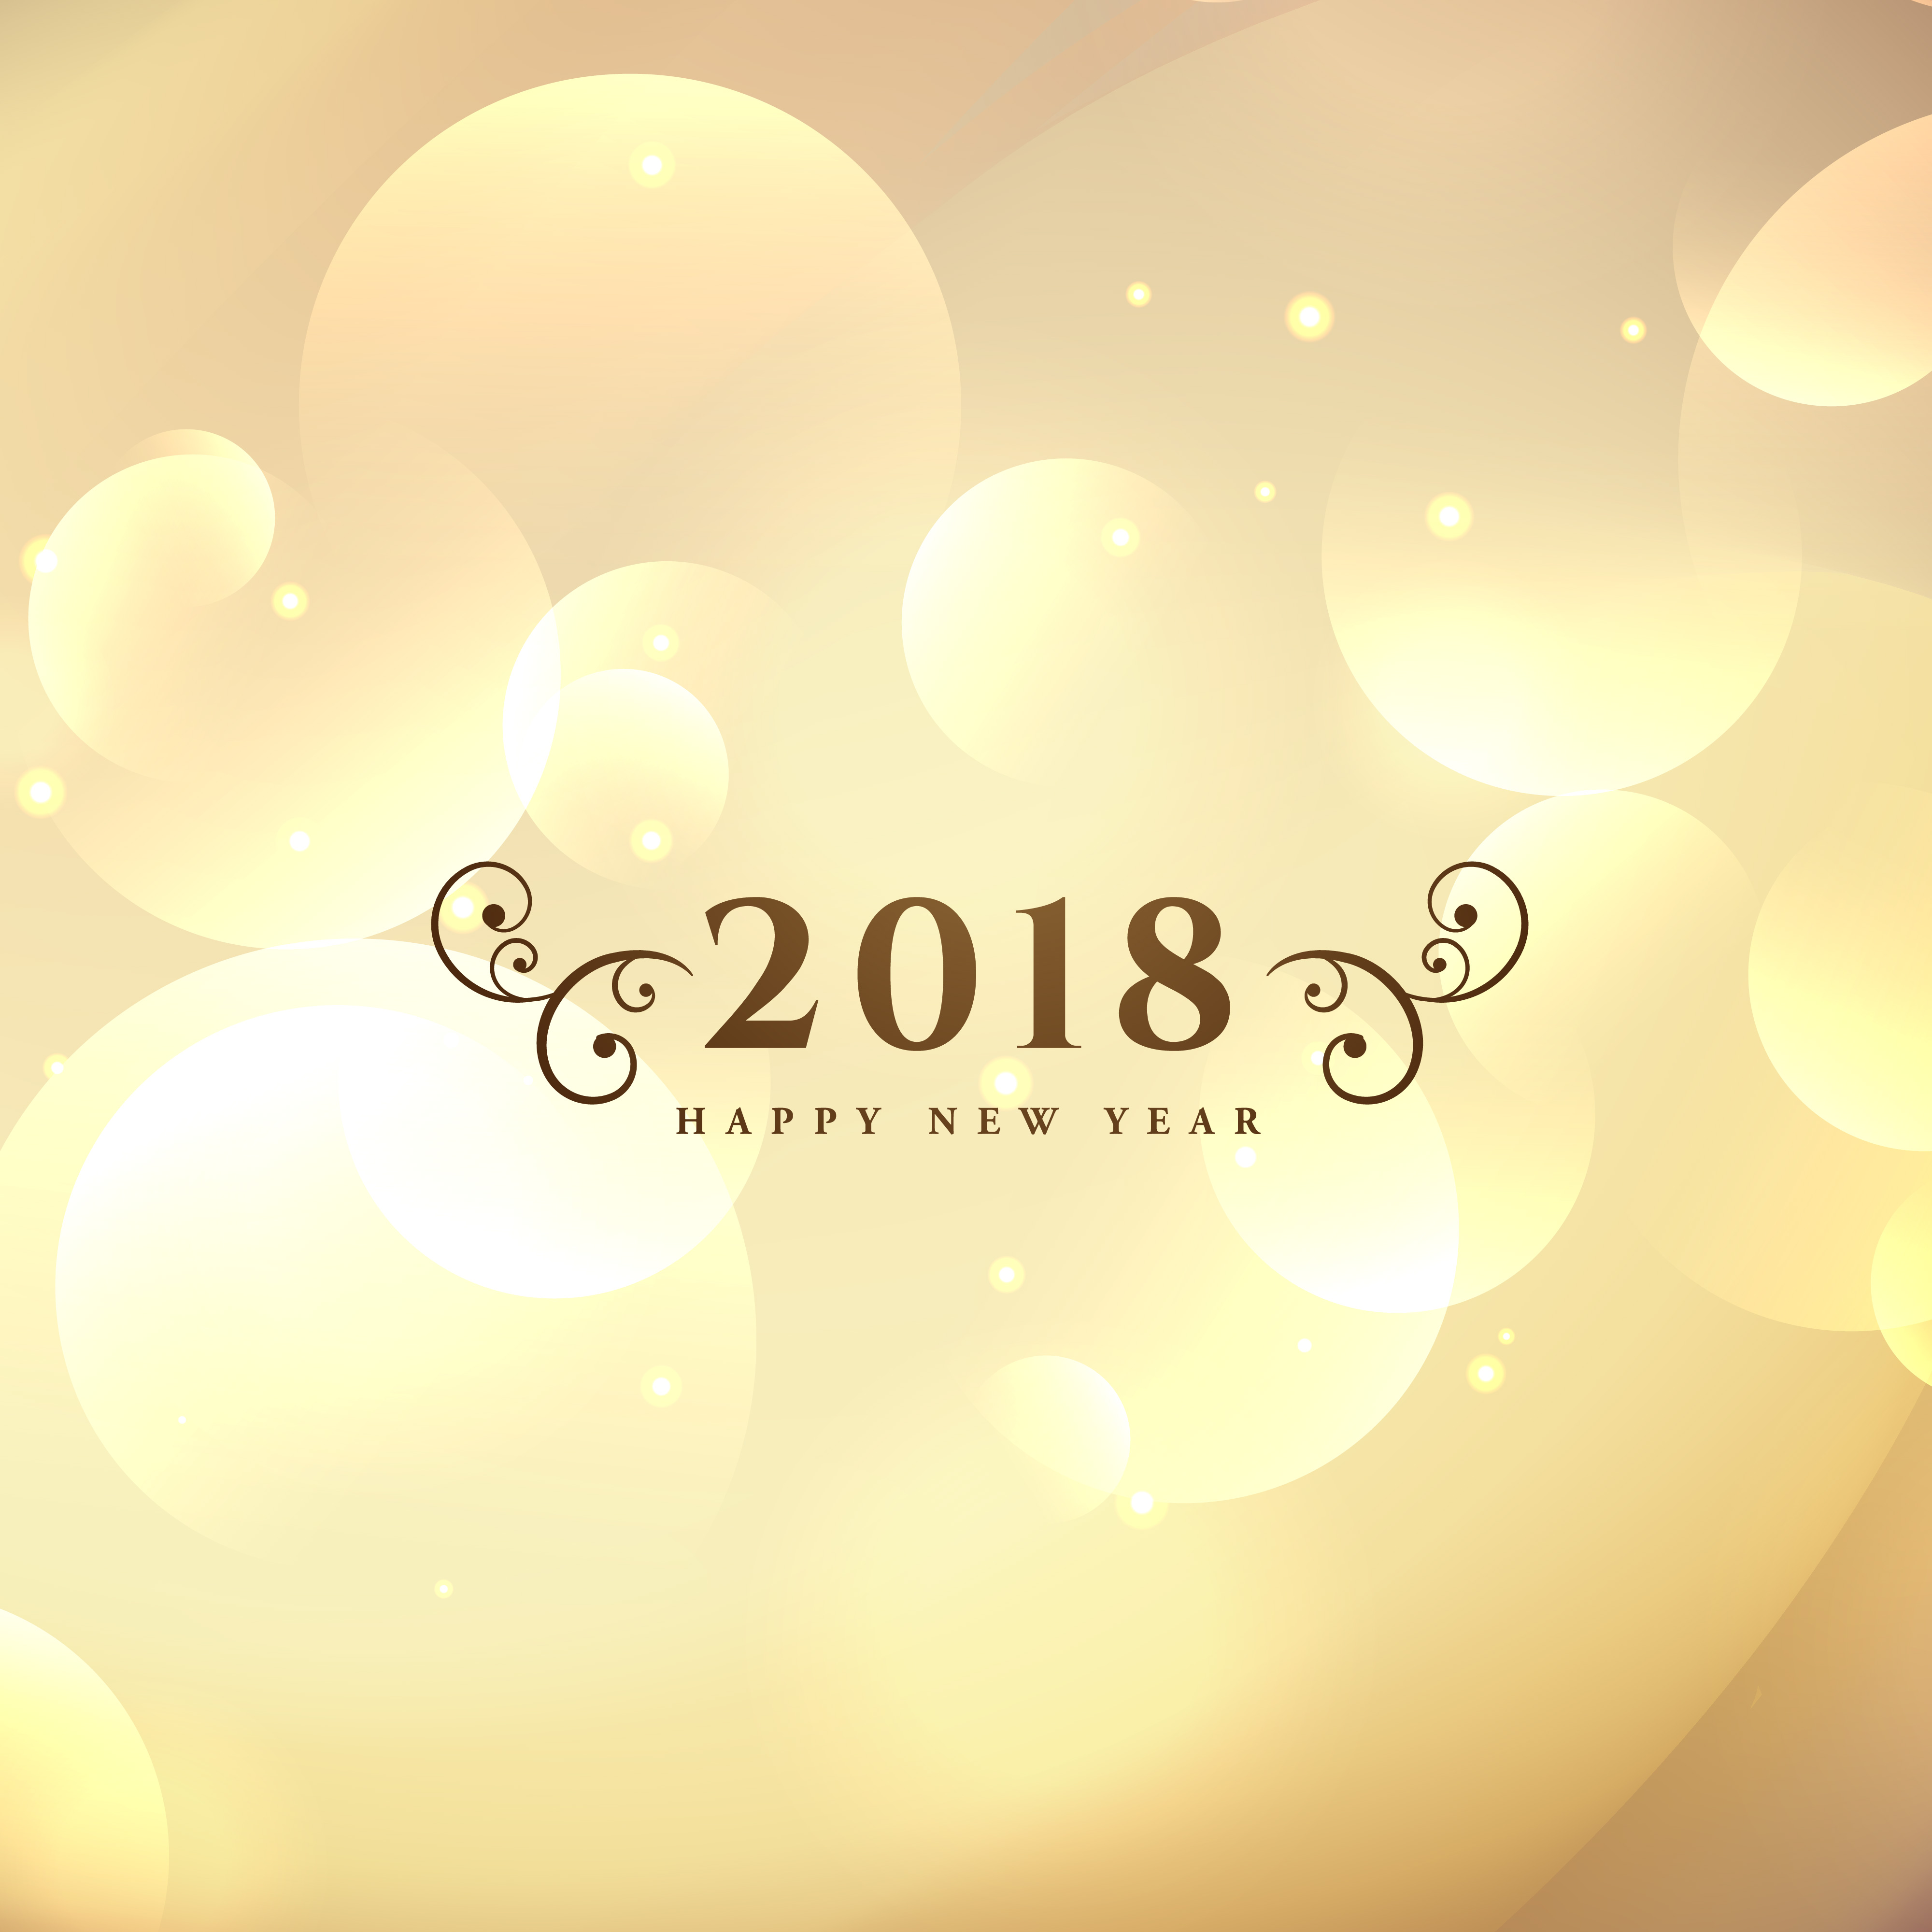 happy new year 2018 simple background - Download Free Vector Art, Stock Graphics & Images